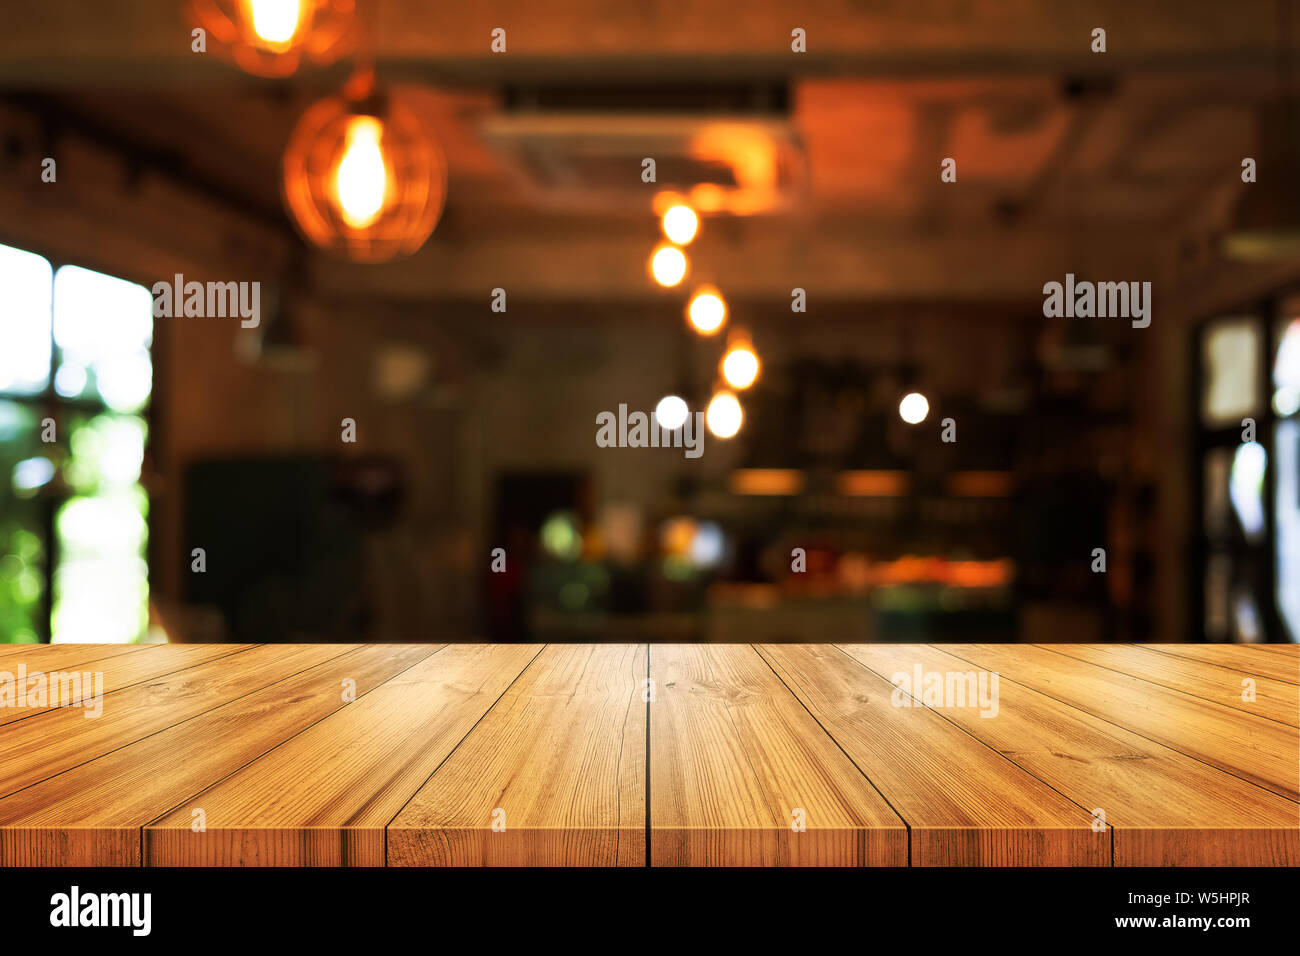 Empty Wooden Table Top With Blurred Coffee Shop Or Restaurant Interior Background Can Be Used Product Display Stock Photo Alamy